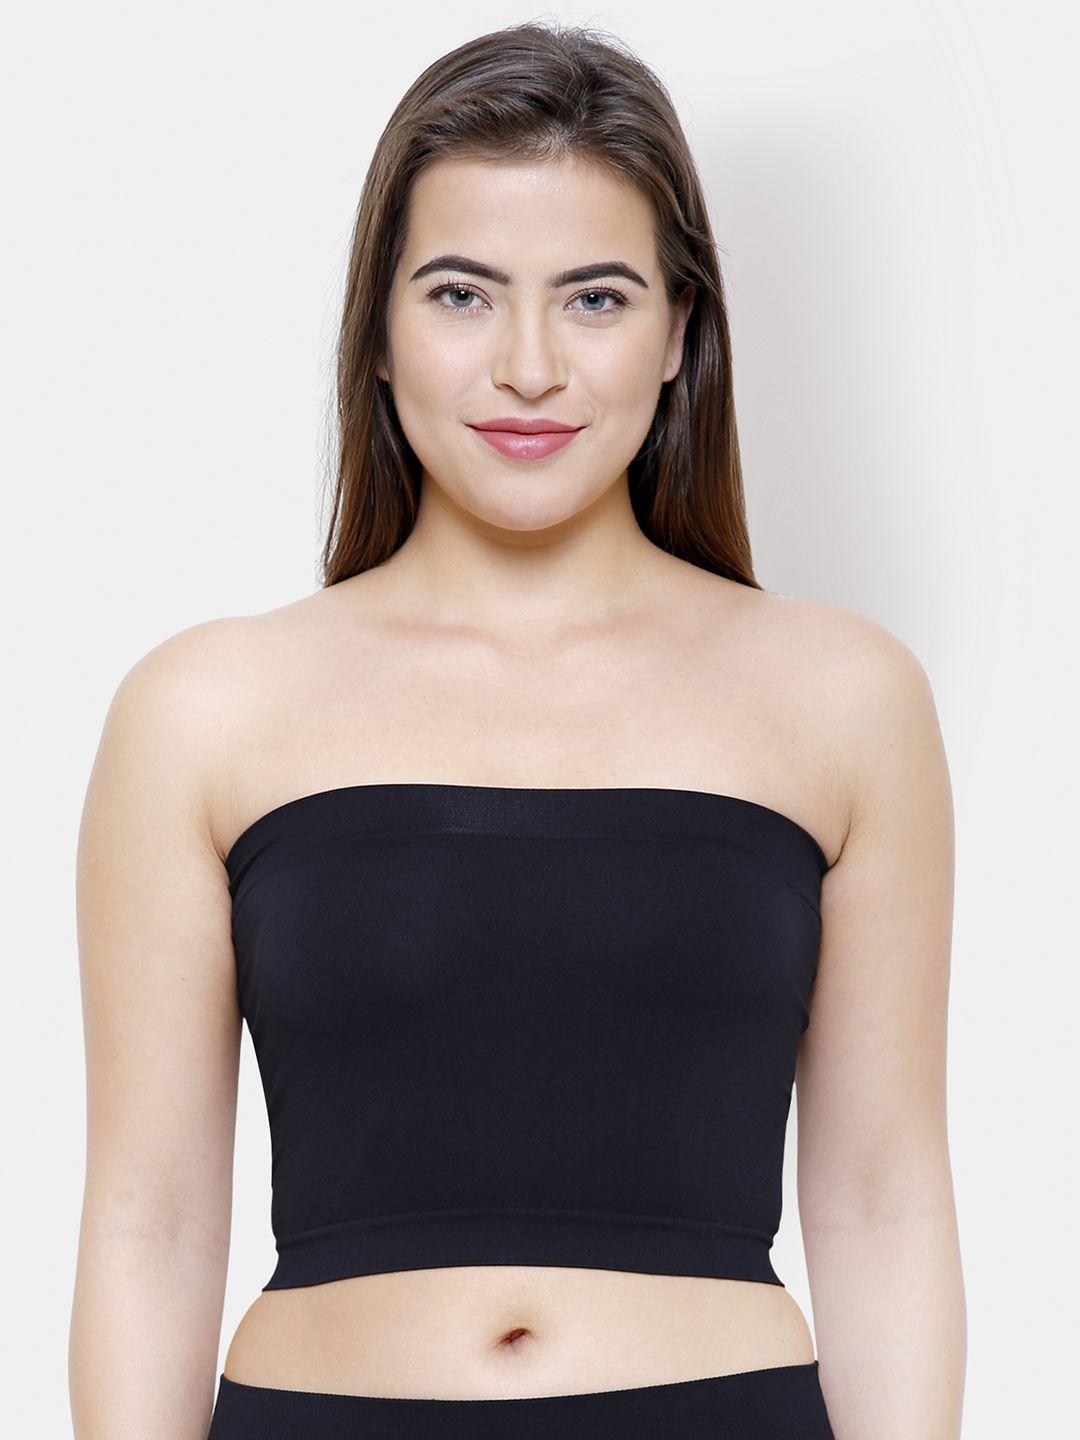 fashionrack women black solid strapless cropped camisole 4018